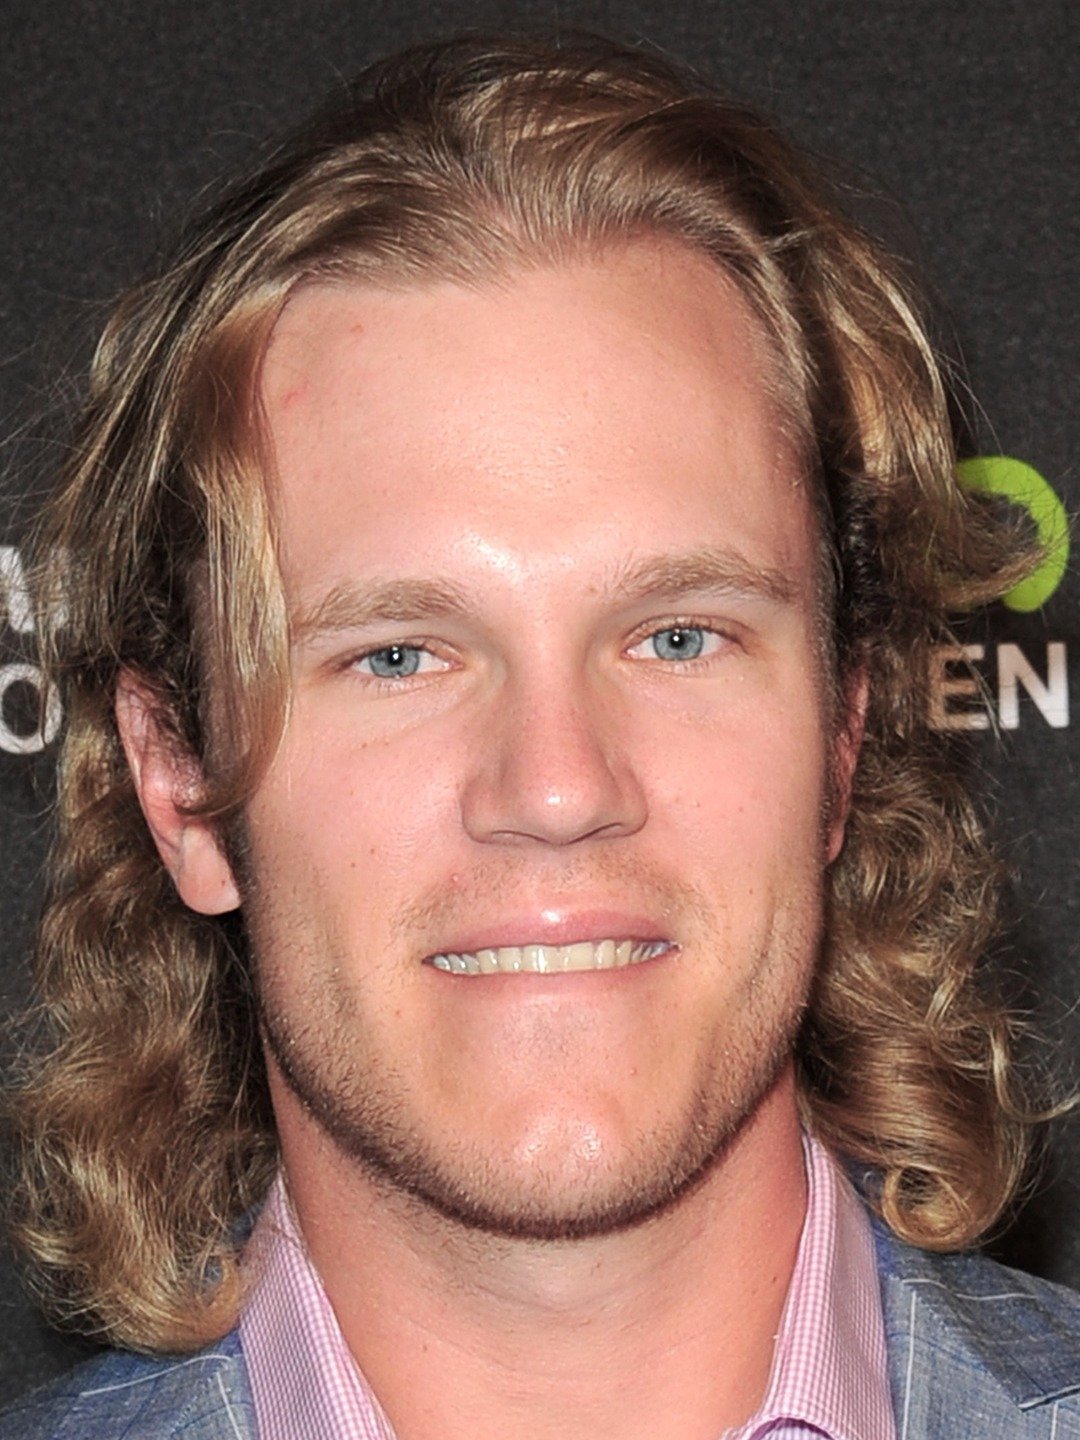 Four Possible Haircut Styles for Noah Syndergaard